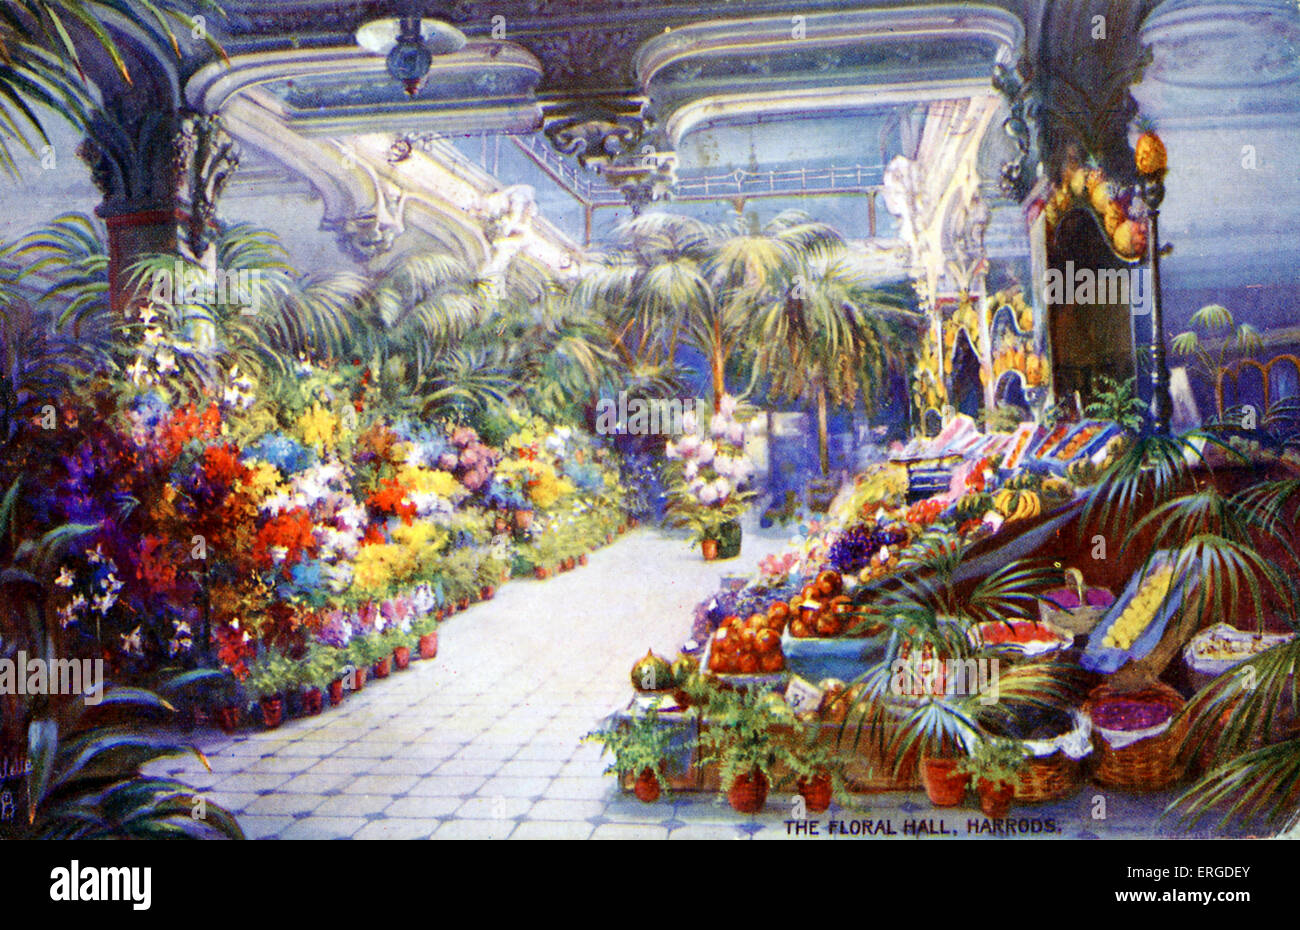 The Floral Hall at Harrods, c.1916. London department store based in Knightsbridge. Caption on back reads: 'The Floral Hall at Stock Photo